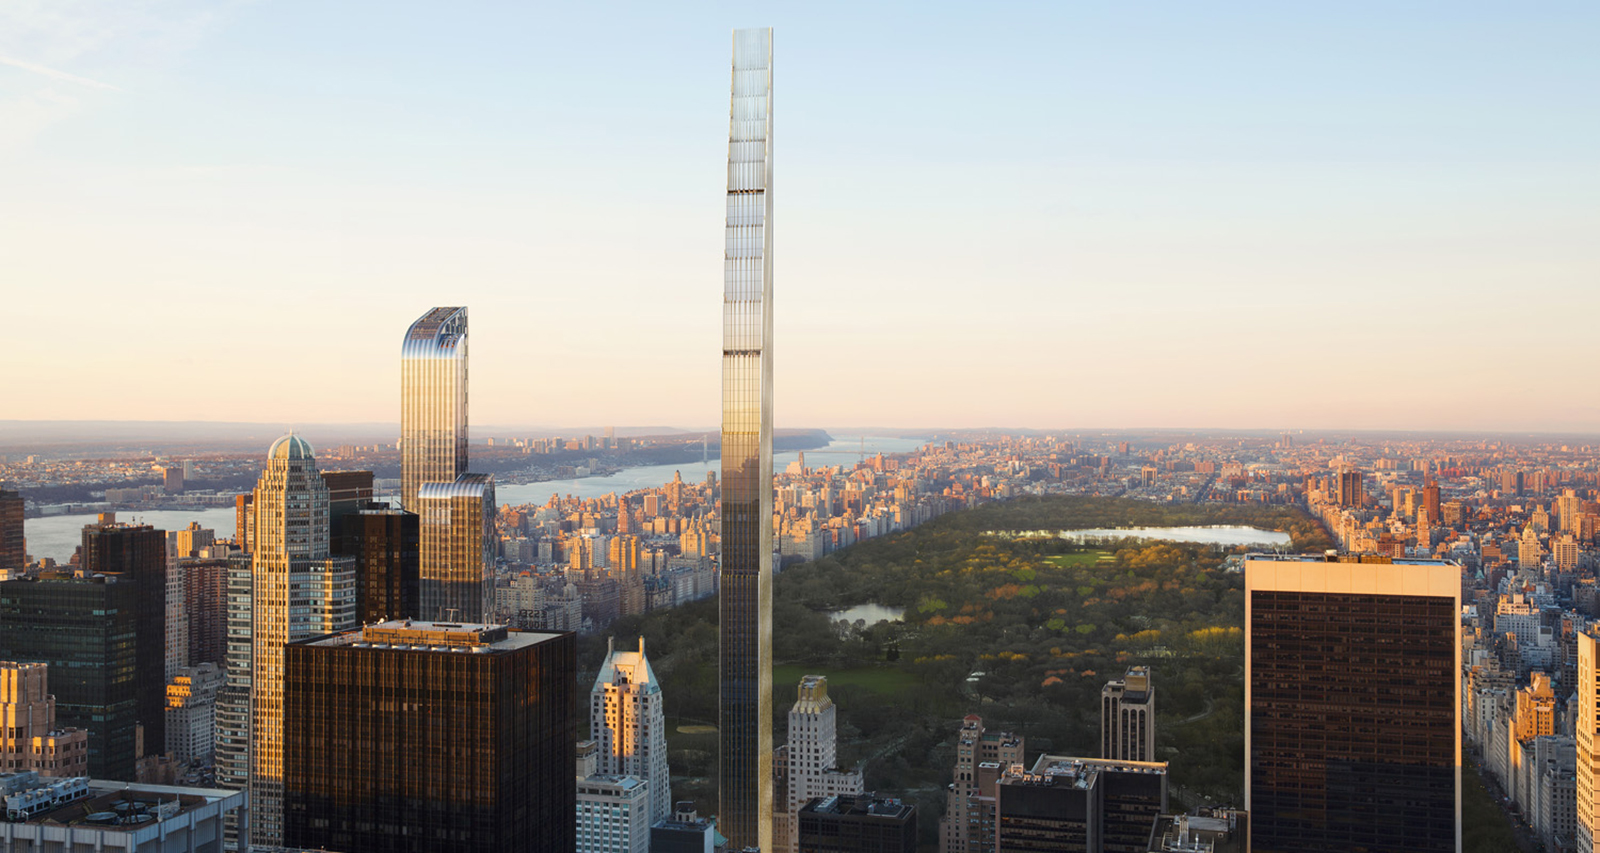 111 West 57th Street - one of the tallest buildings topping out this year